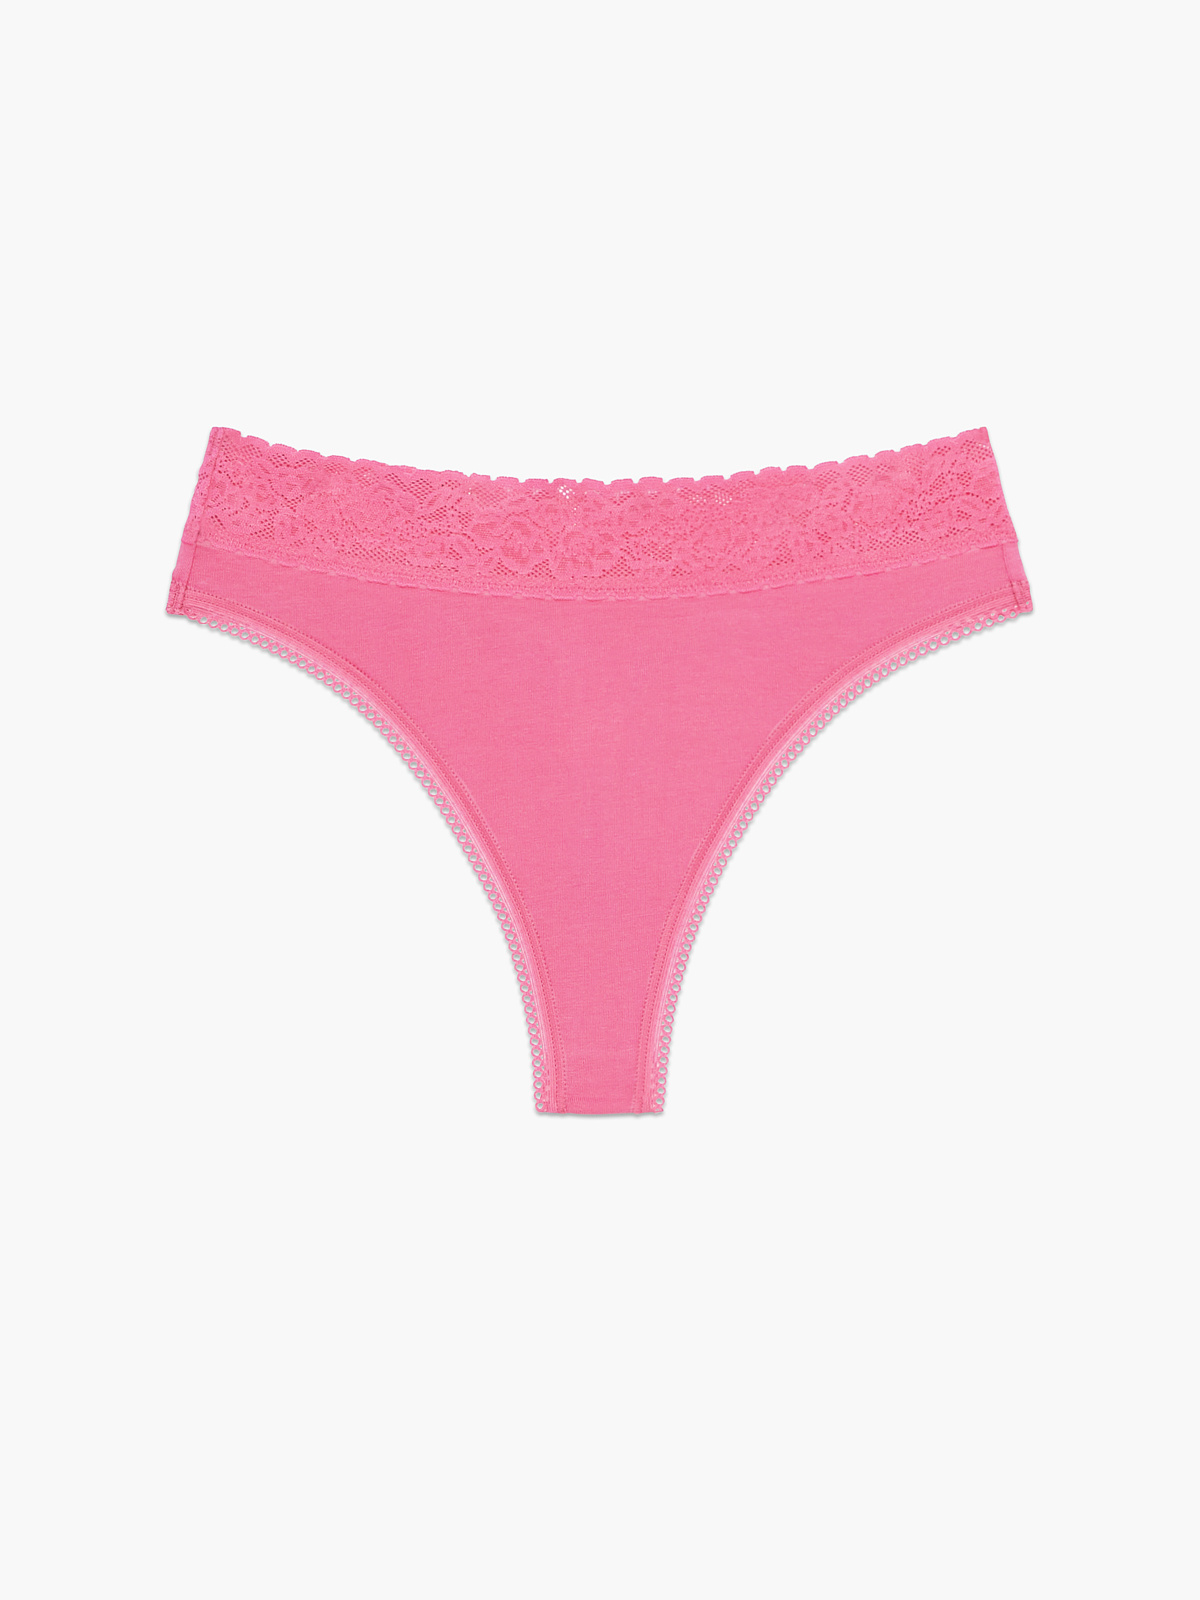 https://cdn.savagex.com/media/images/products/UD2253553-7362/COTTON-ESSENTIALS-MID-RISE-THONG-PANTY-UD2253553-7362-LAYDOWN-1200x1600.jpg